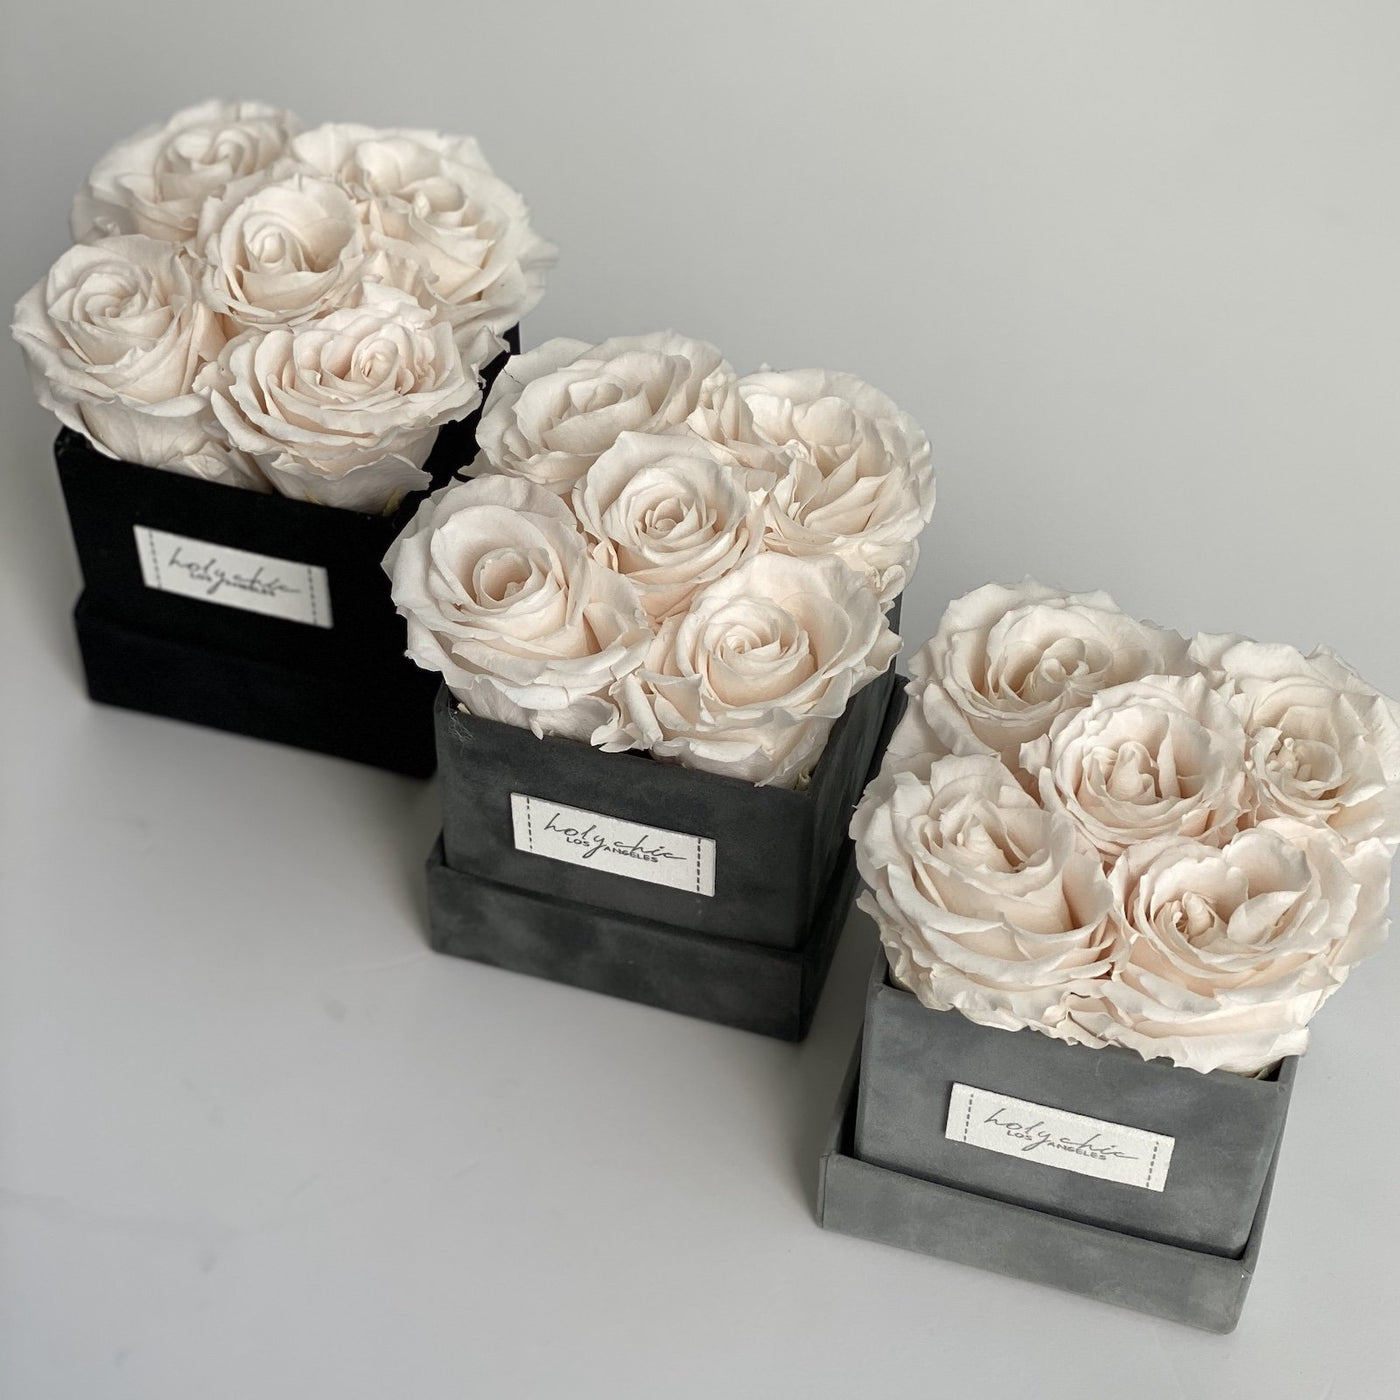 Forever roses set in a small square suede box